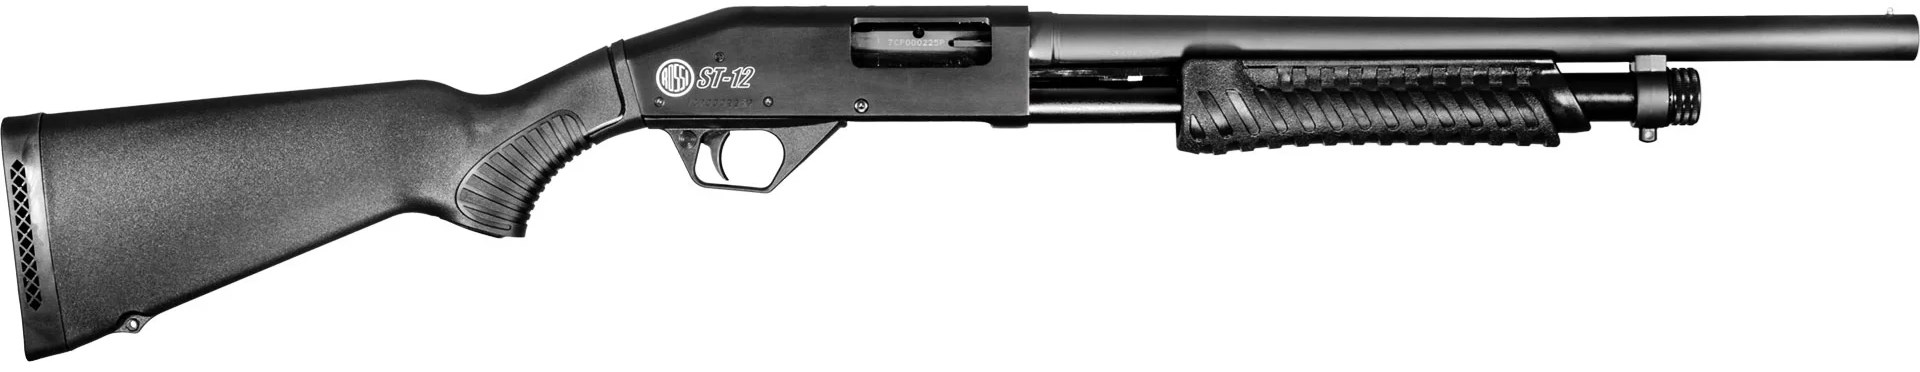 Right-side view on white of Rossi ST12 pump-action shotgun